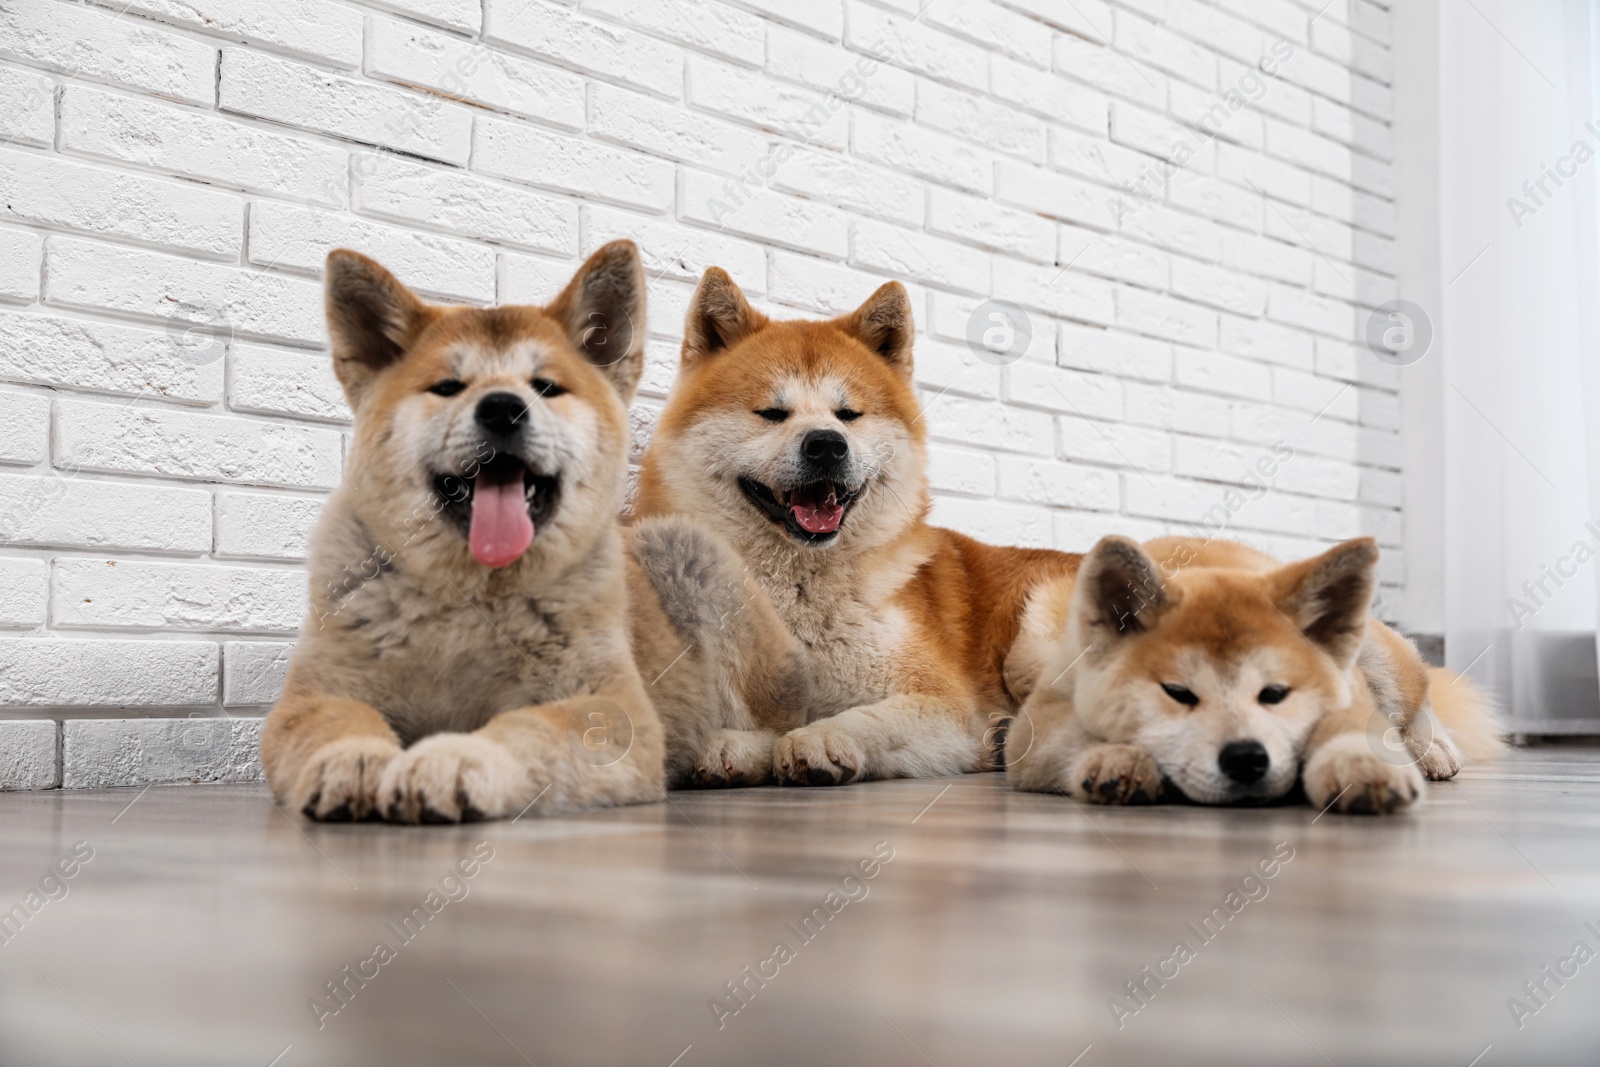 Photo of Adorable Akita Inu dog and puppies on floor indoors